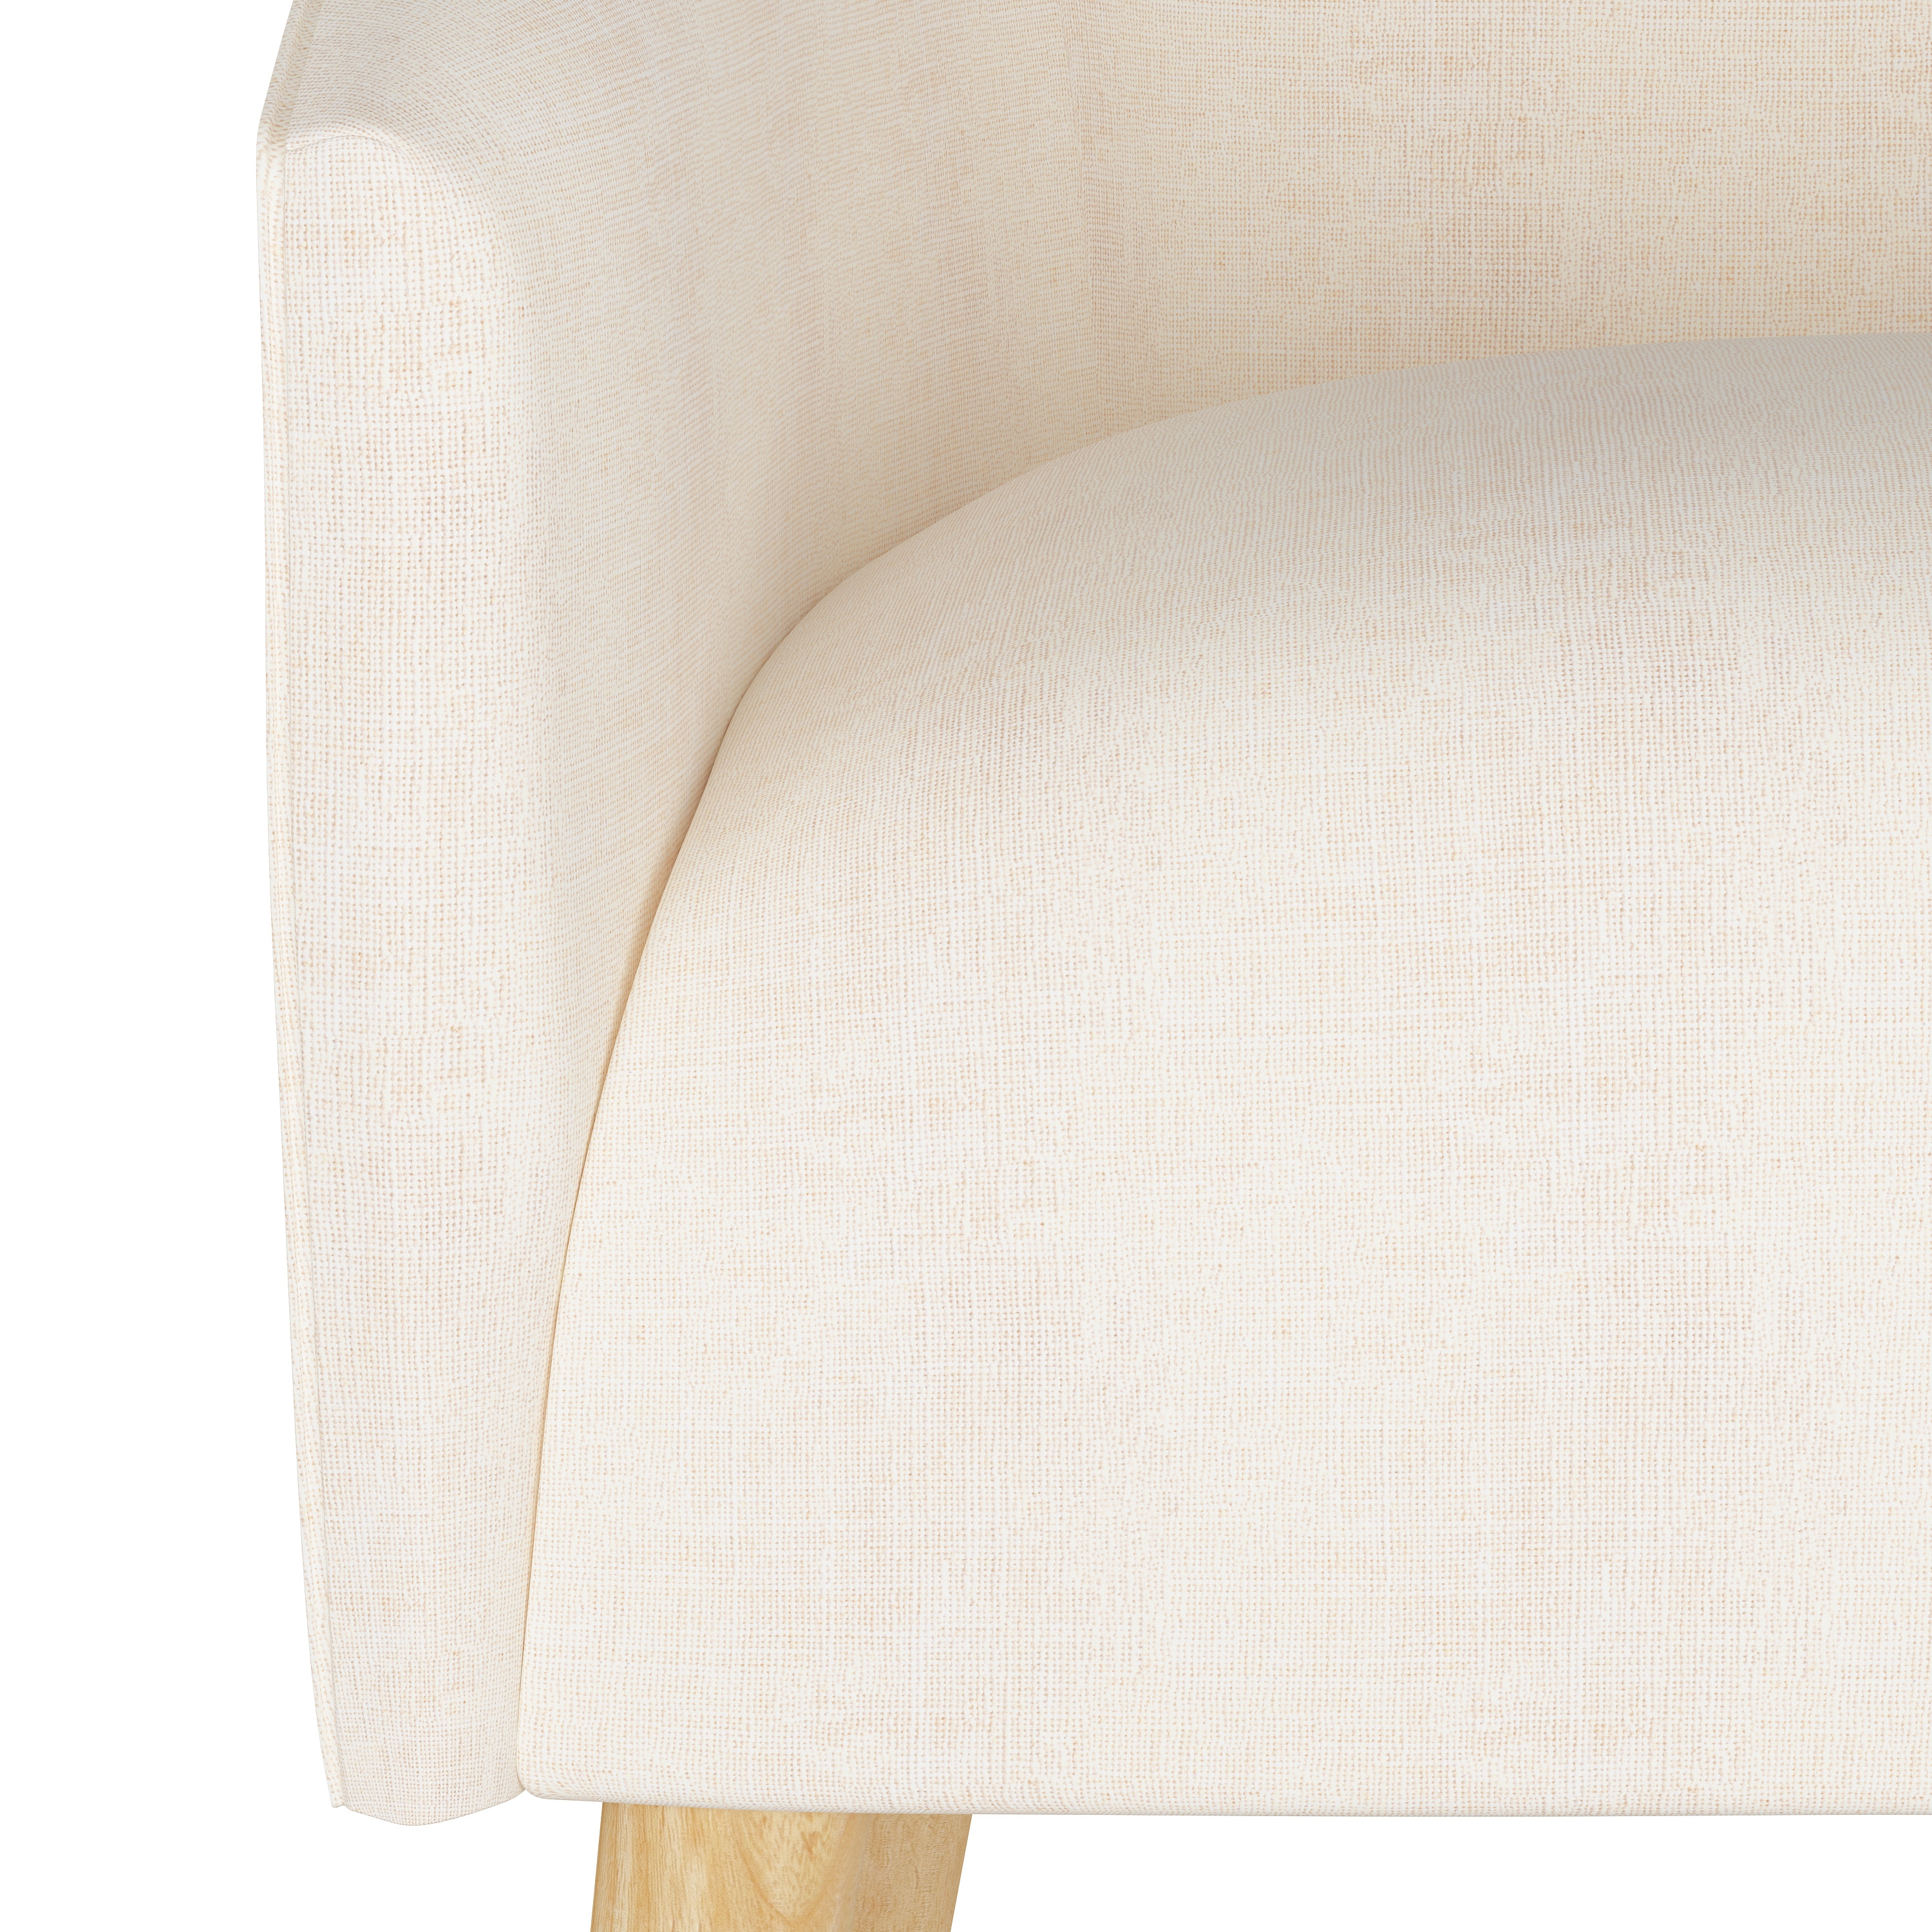 Dexter Chair, White - Image 4